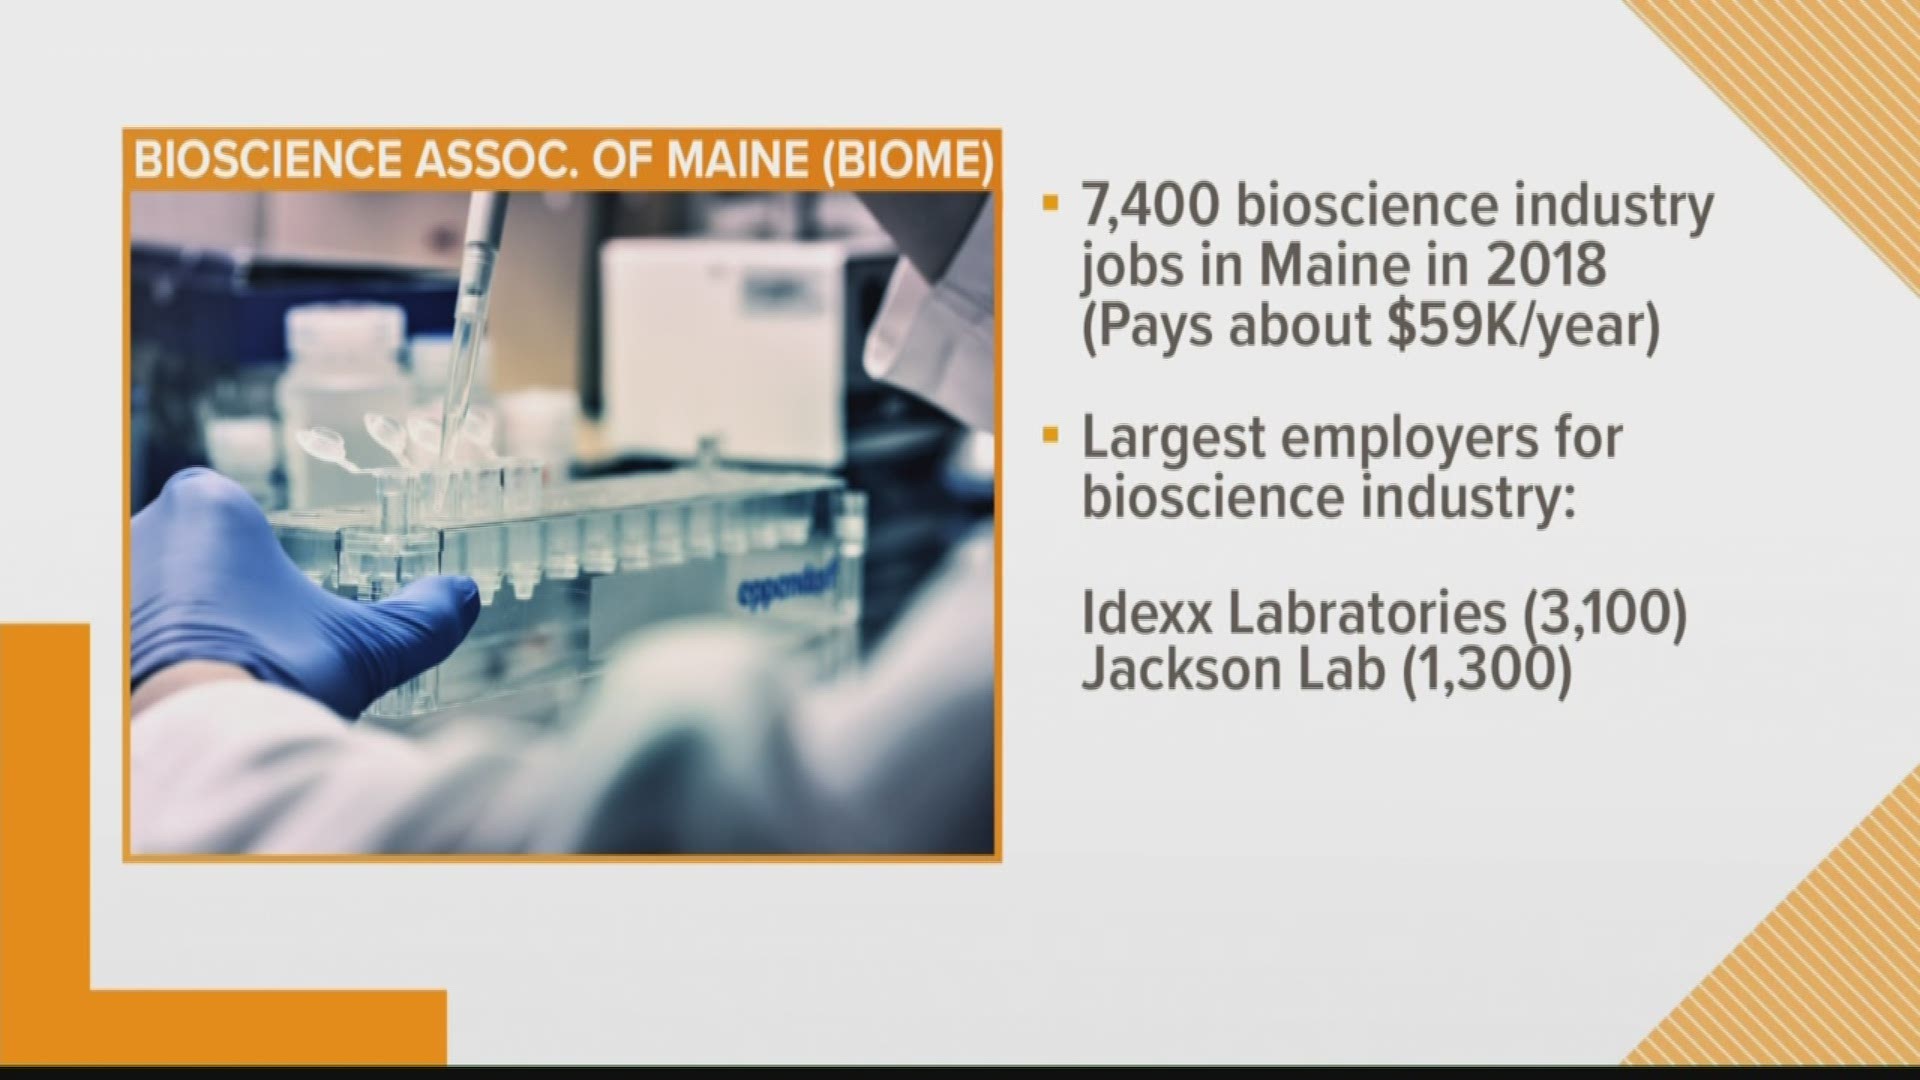 A new study shows that the biological sciences industry is on the rise across Maine.